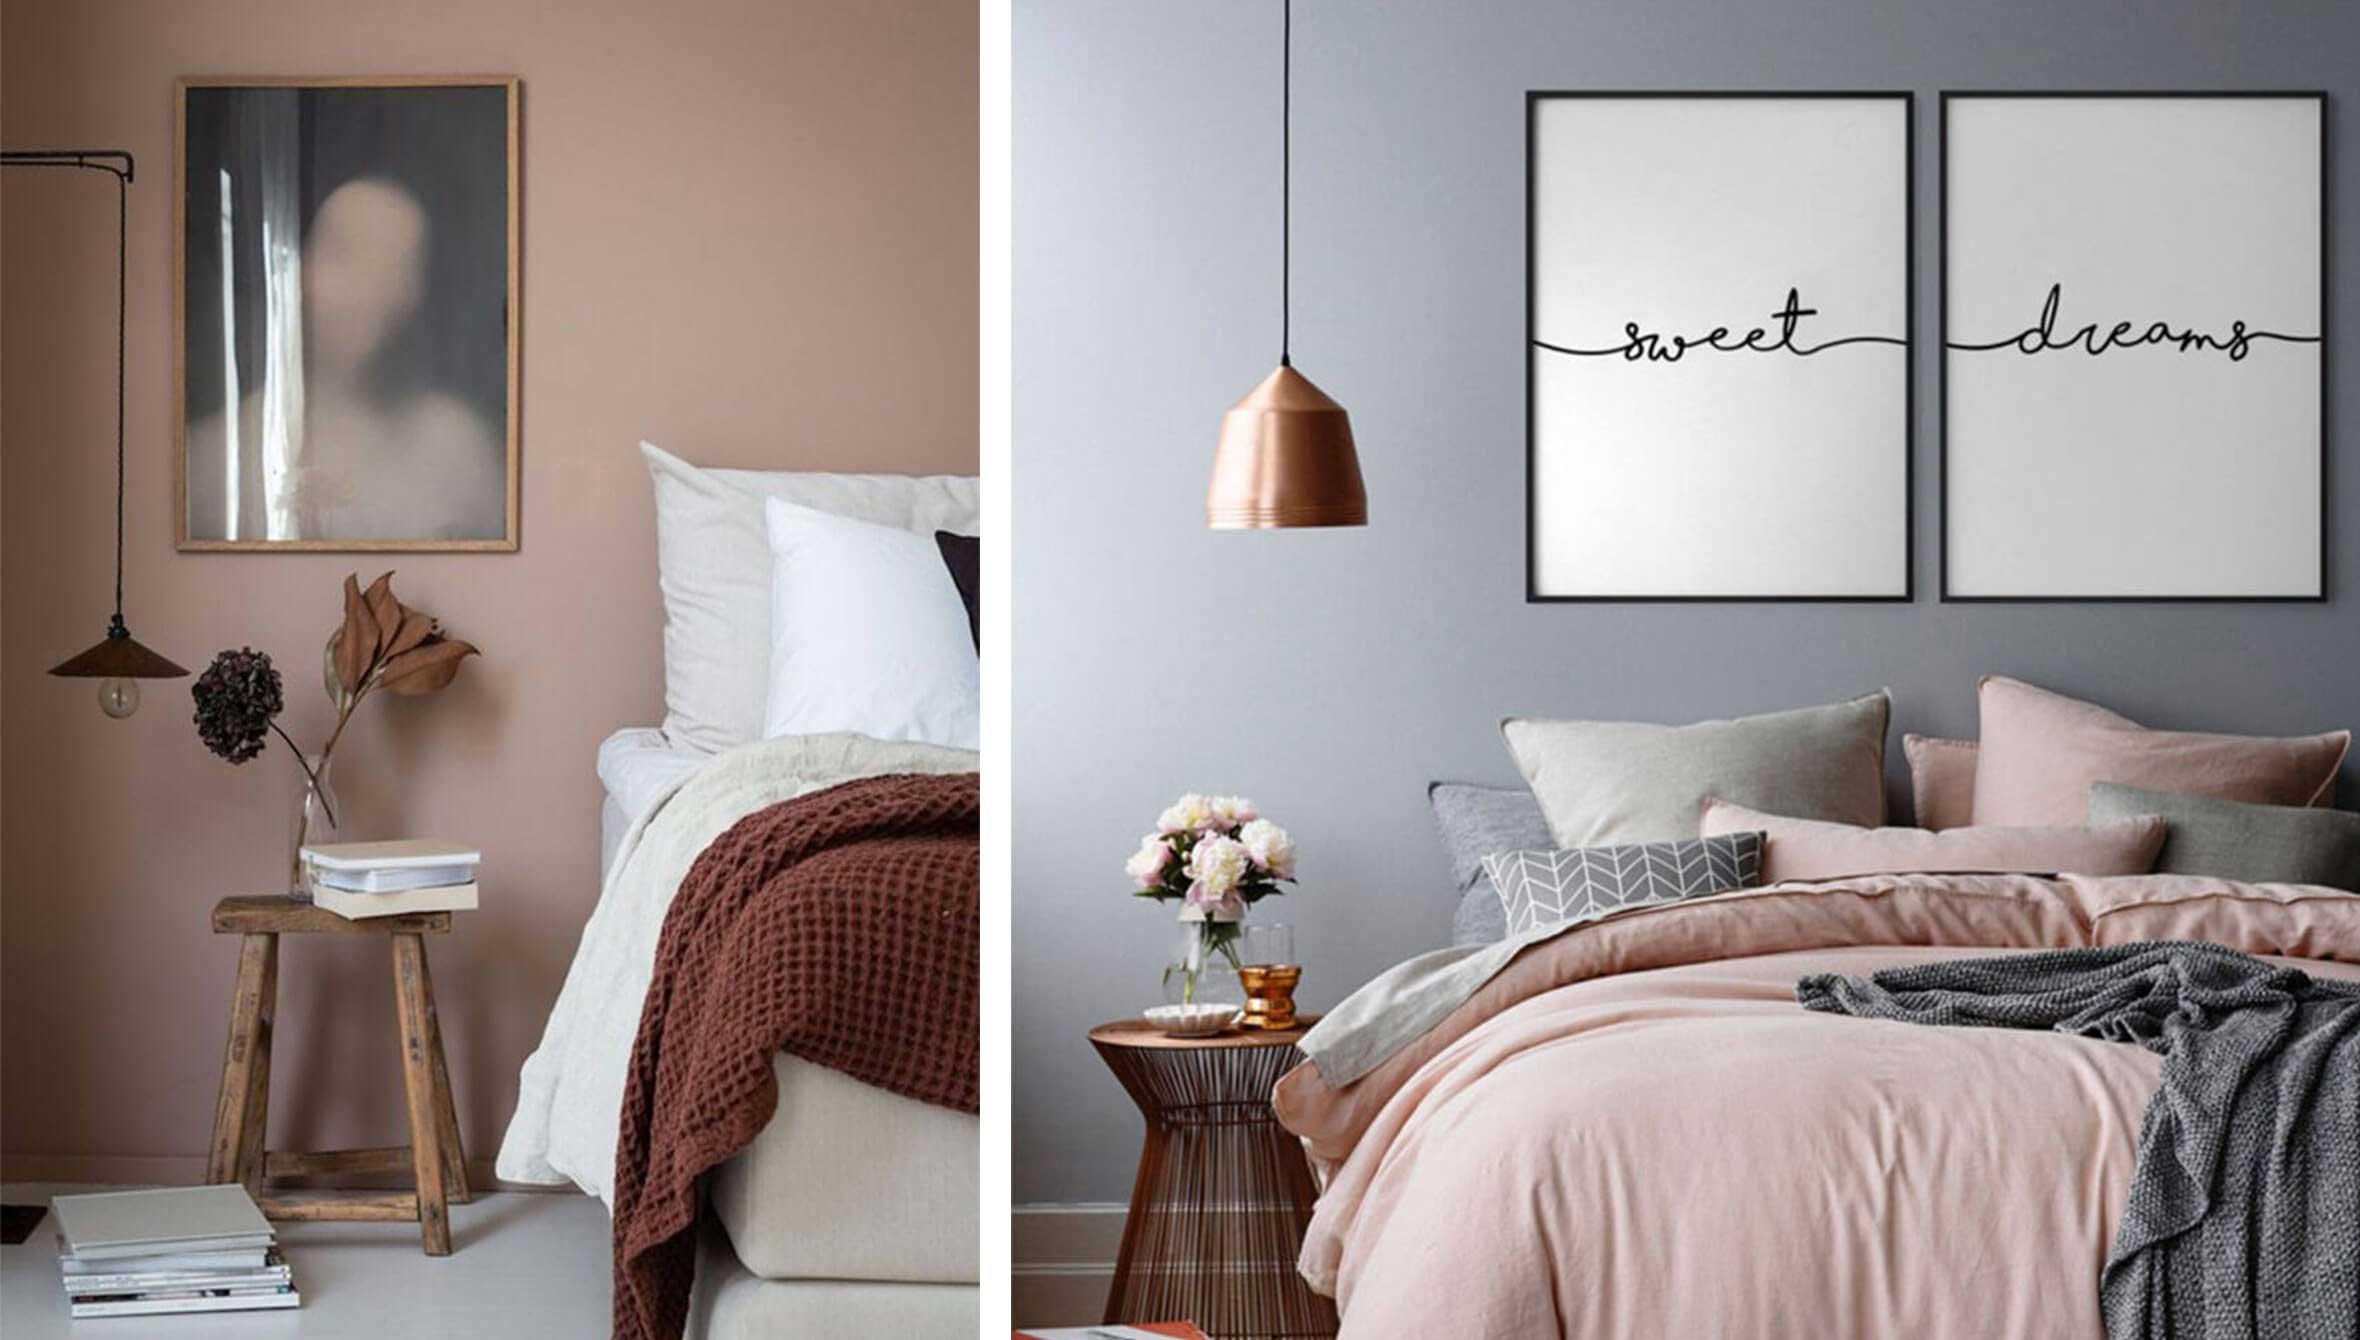 Pink and grey bedroom with pink bedding and grey walls.